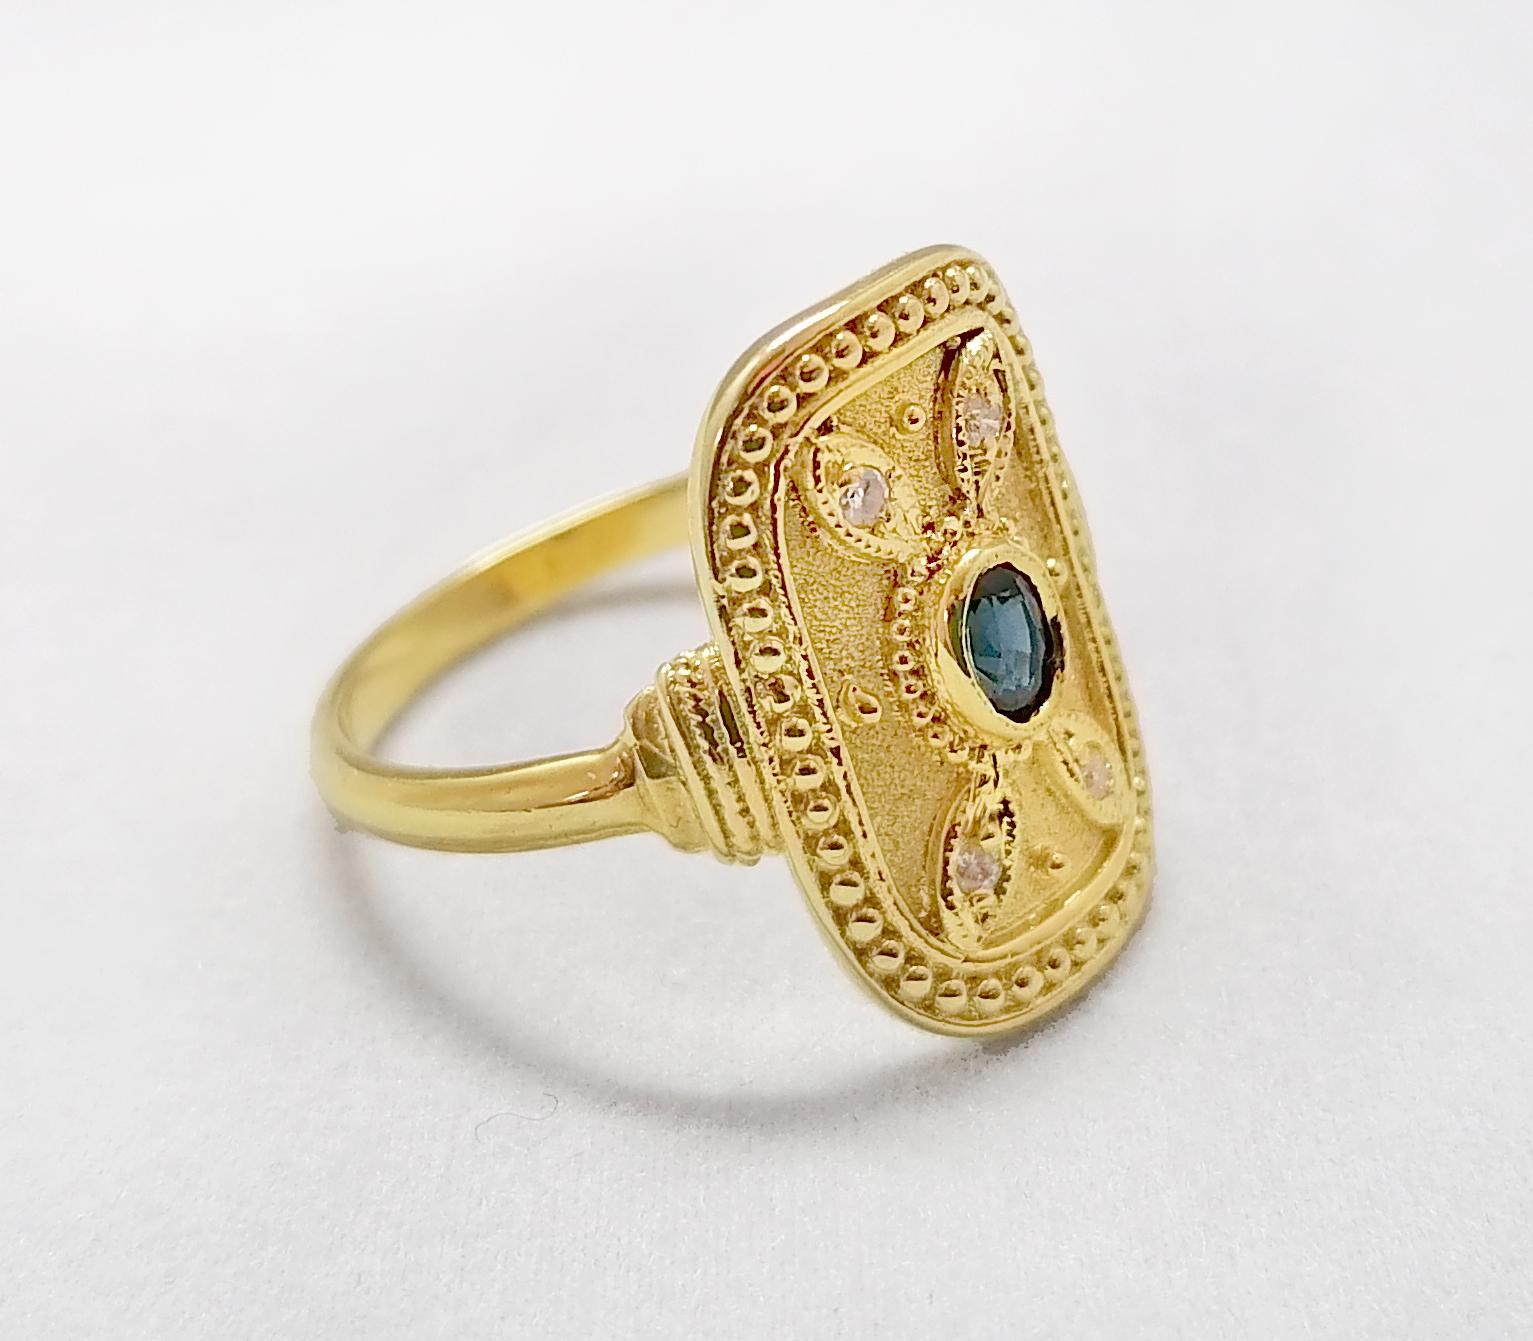 This S.Georgios designer ring is handmade from solid 18 Karat Yellow Gold and is microscopically decorated with Byzantine-style granulation work creating a stunning art piece. This beautiful long ring features an elegant center oval-cut natural